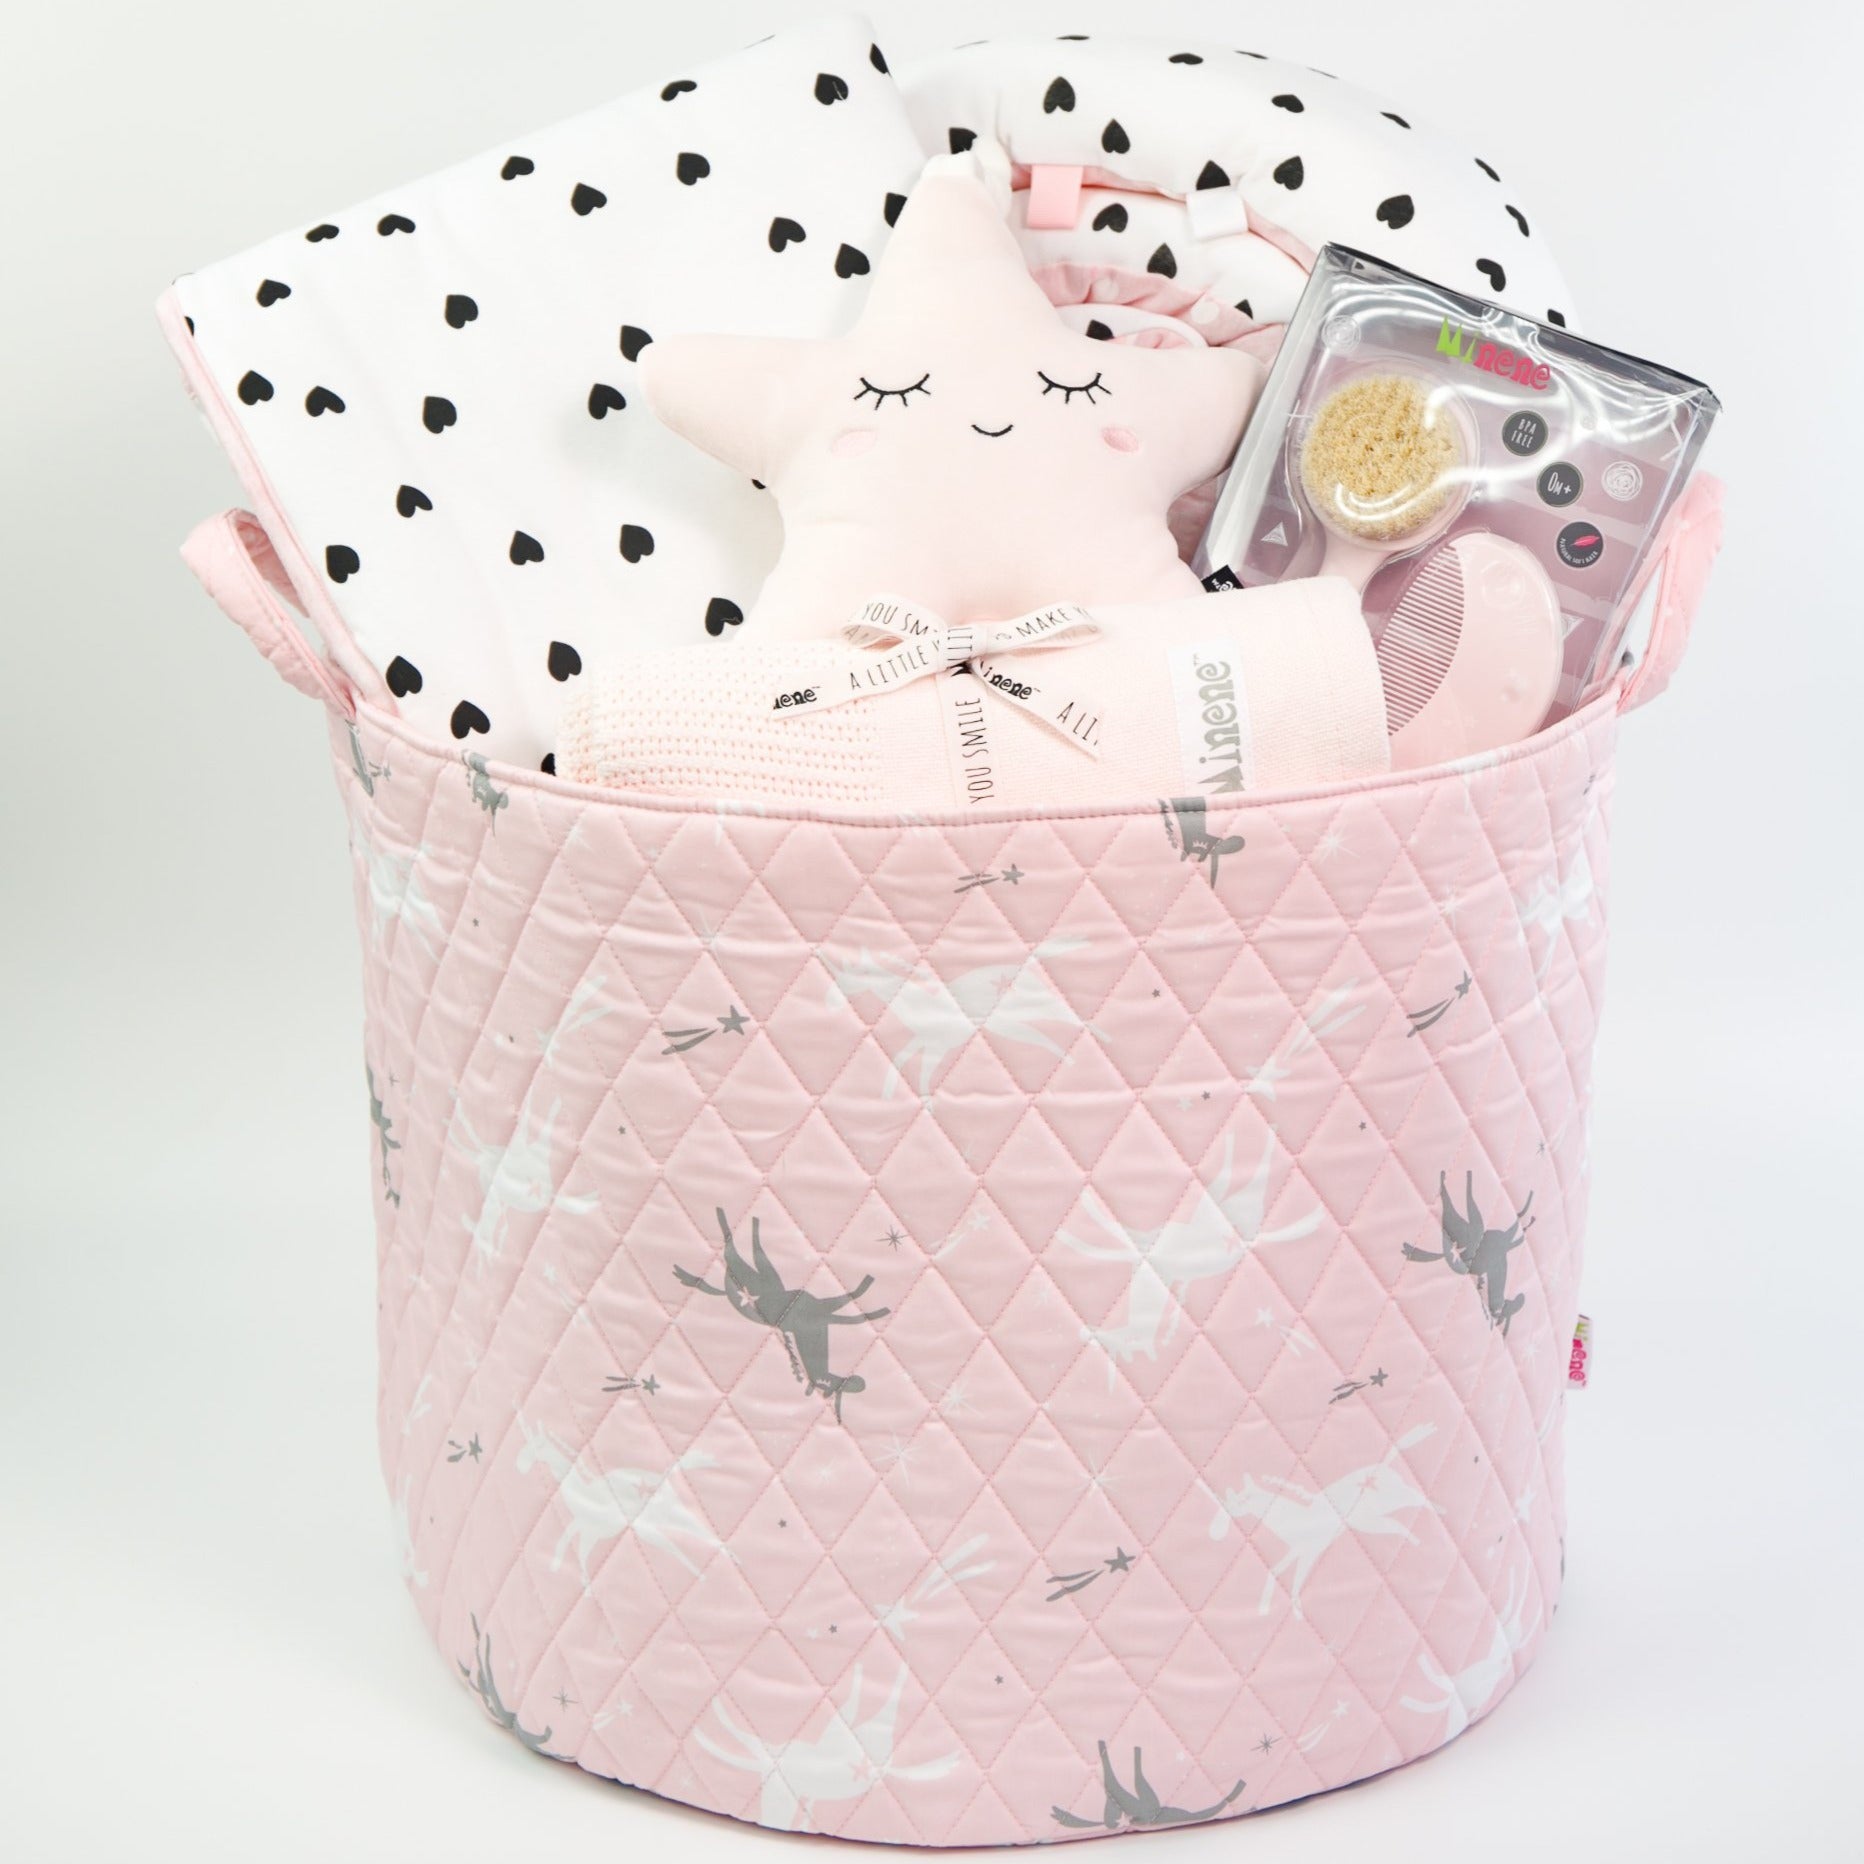 It's A Girl Gift Basket - Pink Heart !